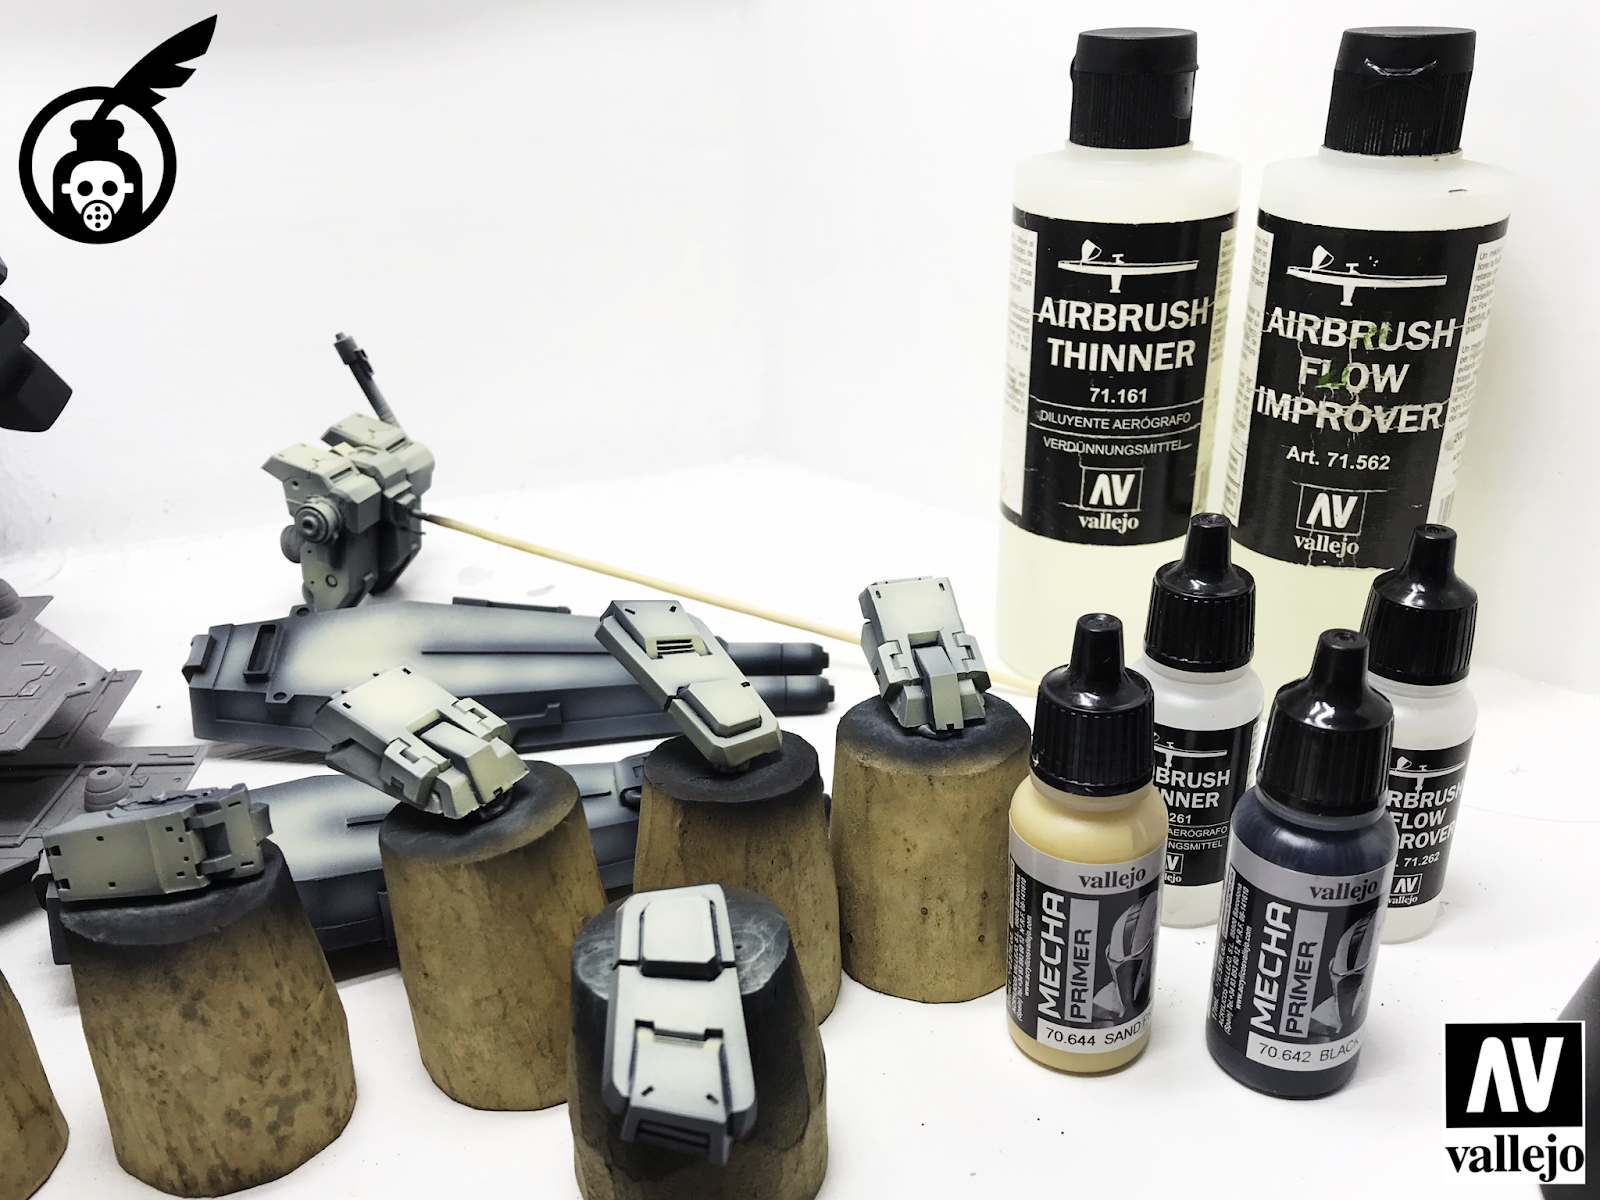 Don Suratos aka DC23: Priming the Full Armor Gundam RX781 with